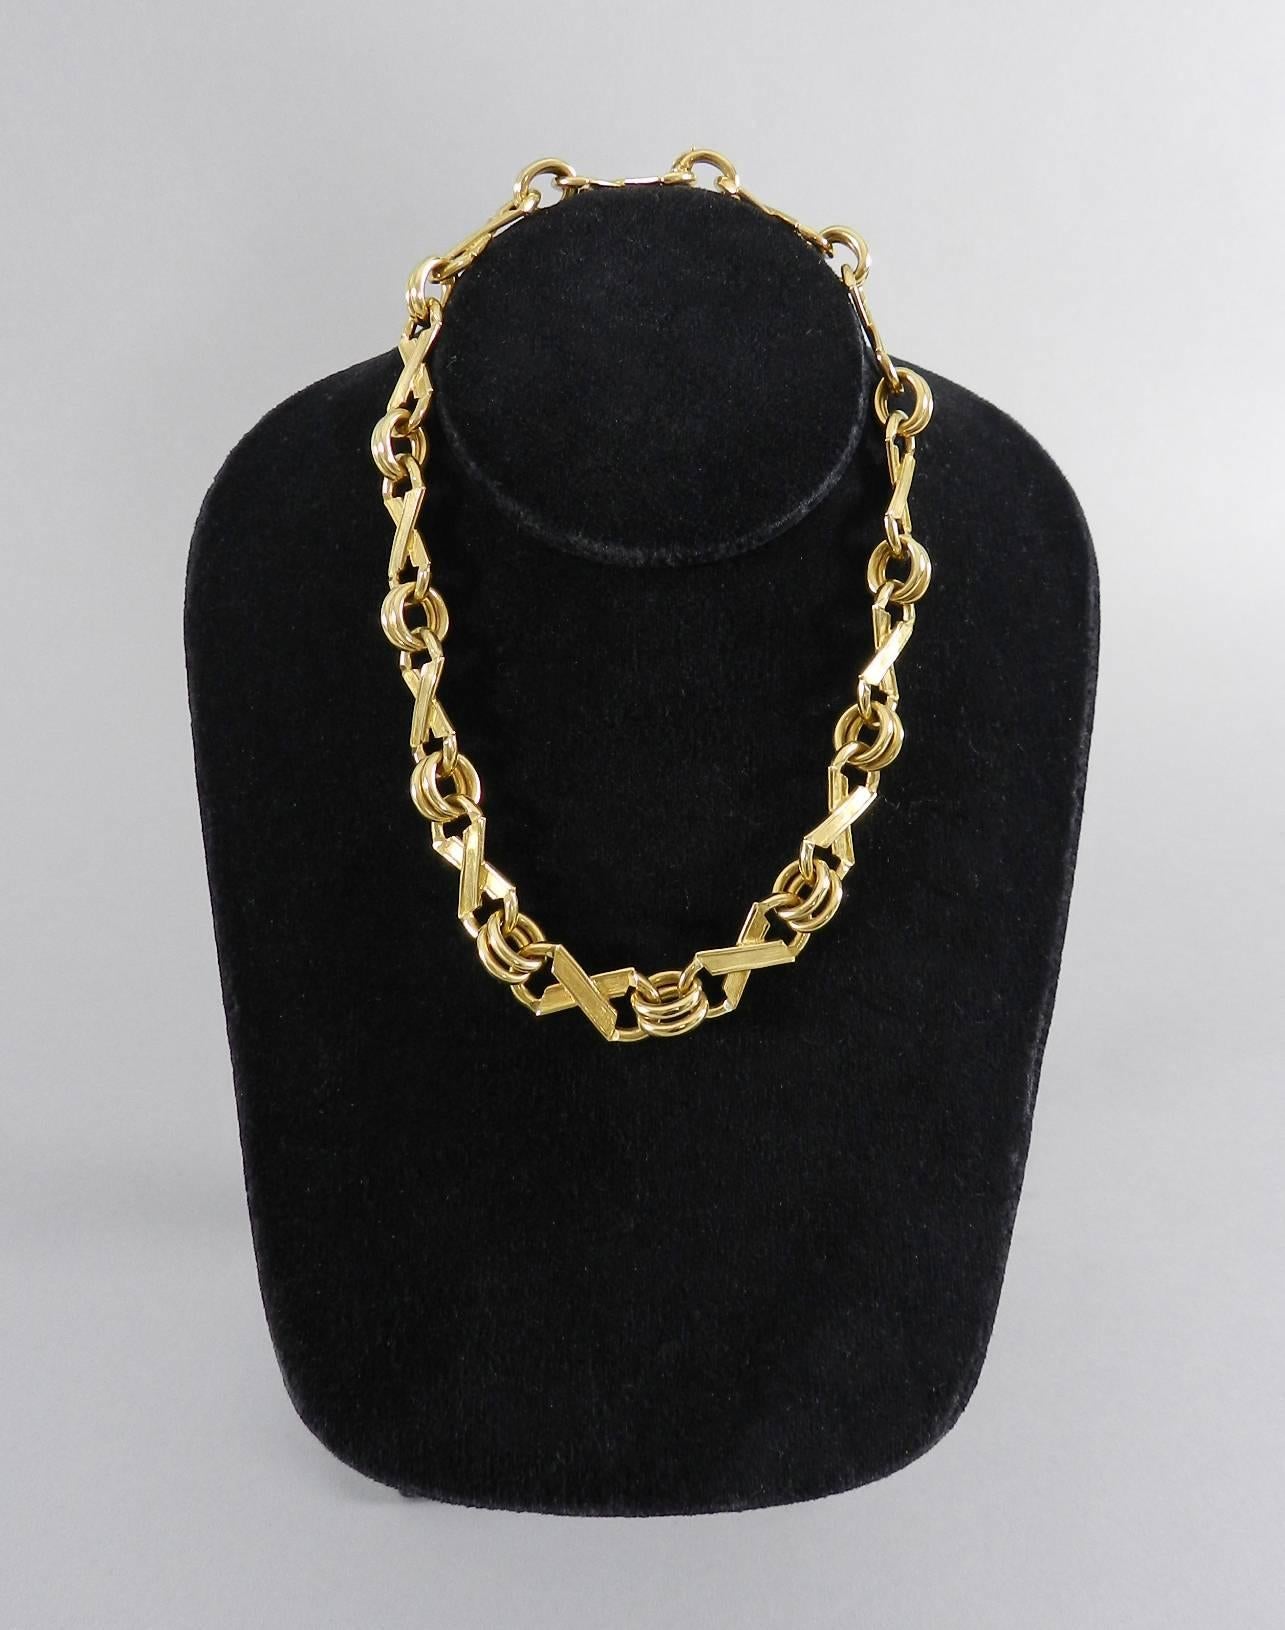 Jean Schlumberger Tiffany &Co 18k X link choker necklace. Fastens with hinged clasp. Hallmarked Schlumberger Tiffany and Co 750.  Measures 15.5” long and 0.5” wide. Total weight 99.3 grams. Excellent condition.

We ship worldwide.